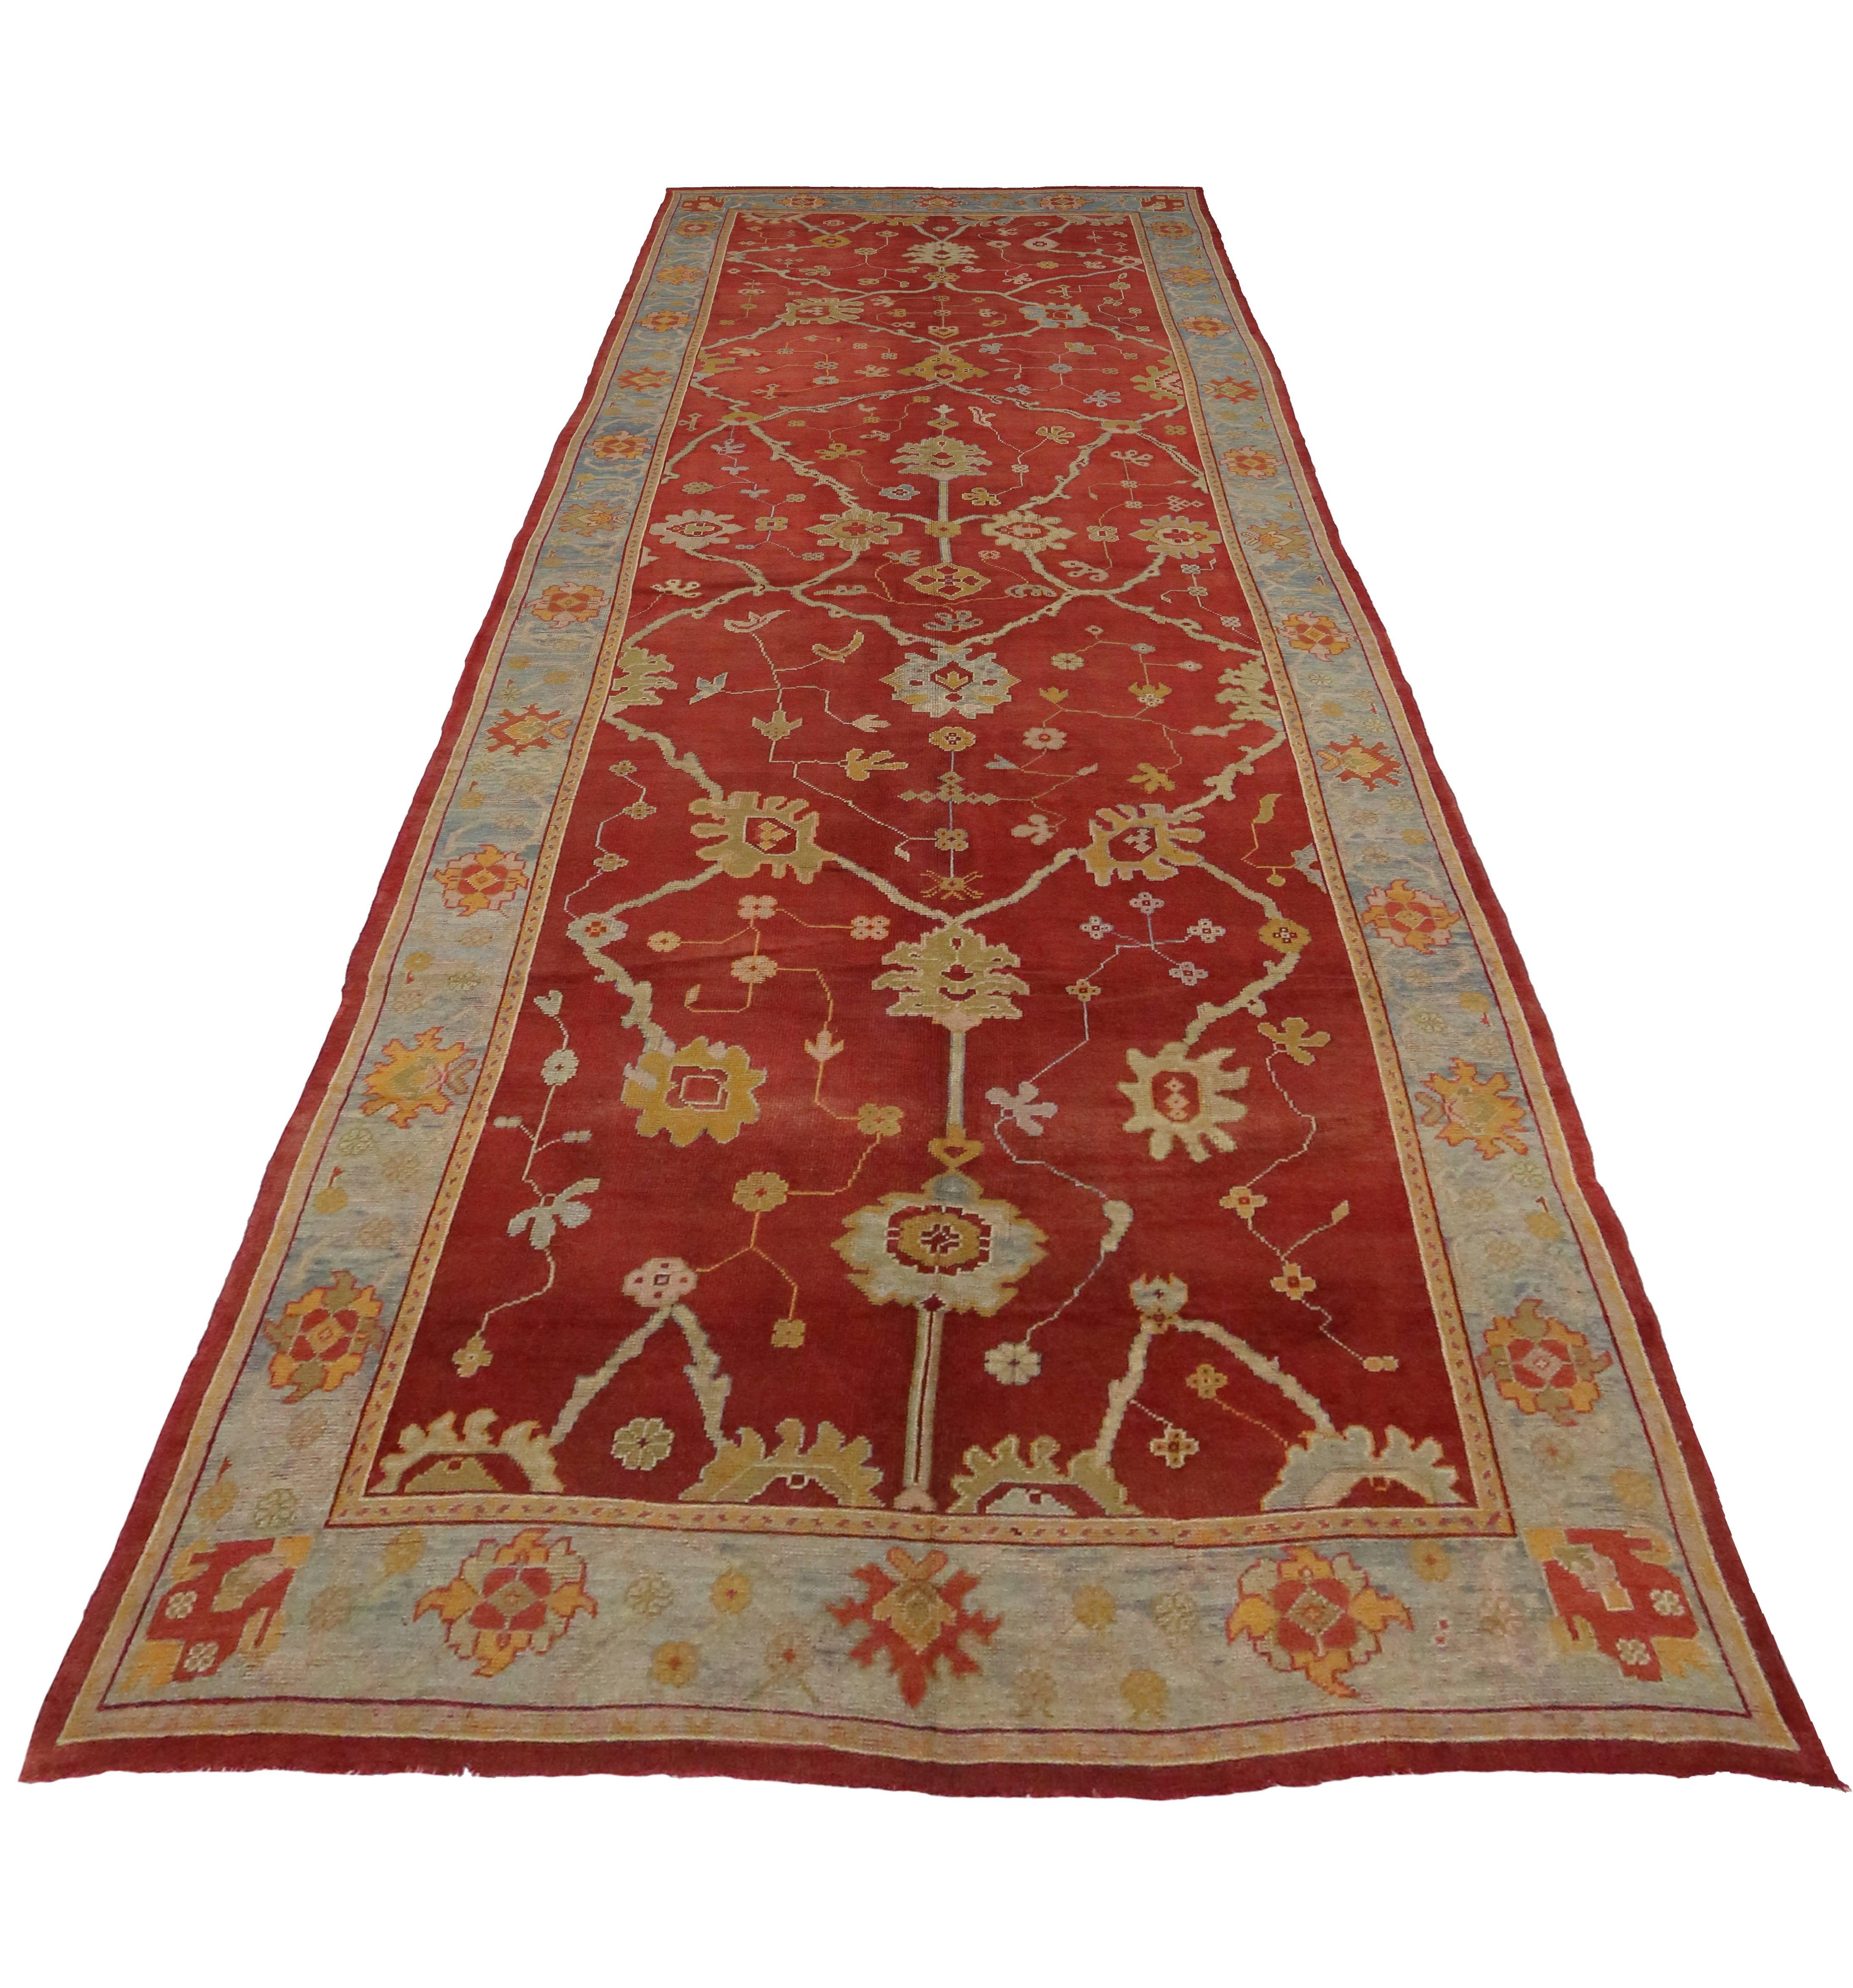 Antique Turkish Oushak Gallery Rug with Arts and Crafts Style In Good Condition For Sale In Dallas, TX